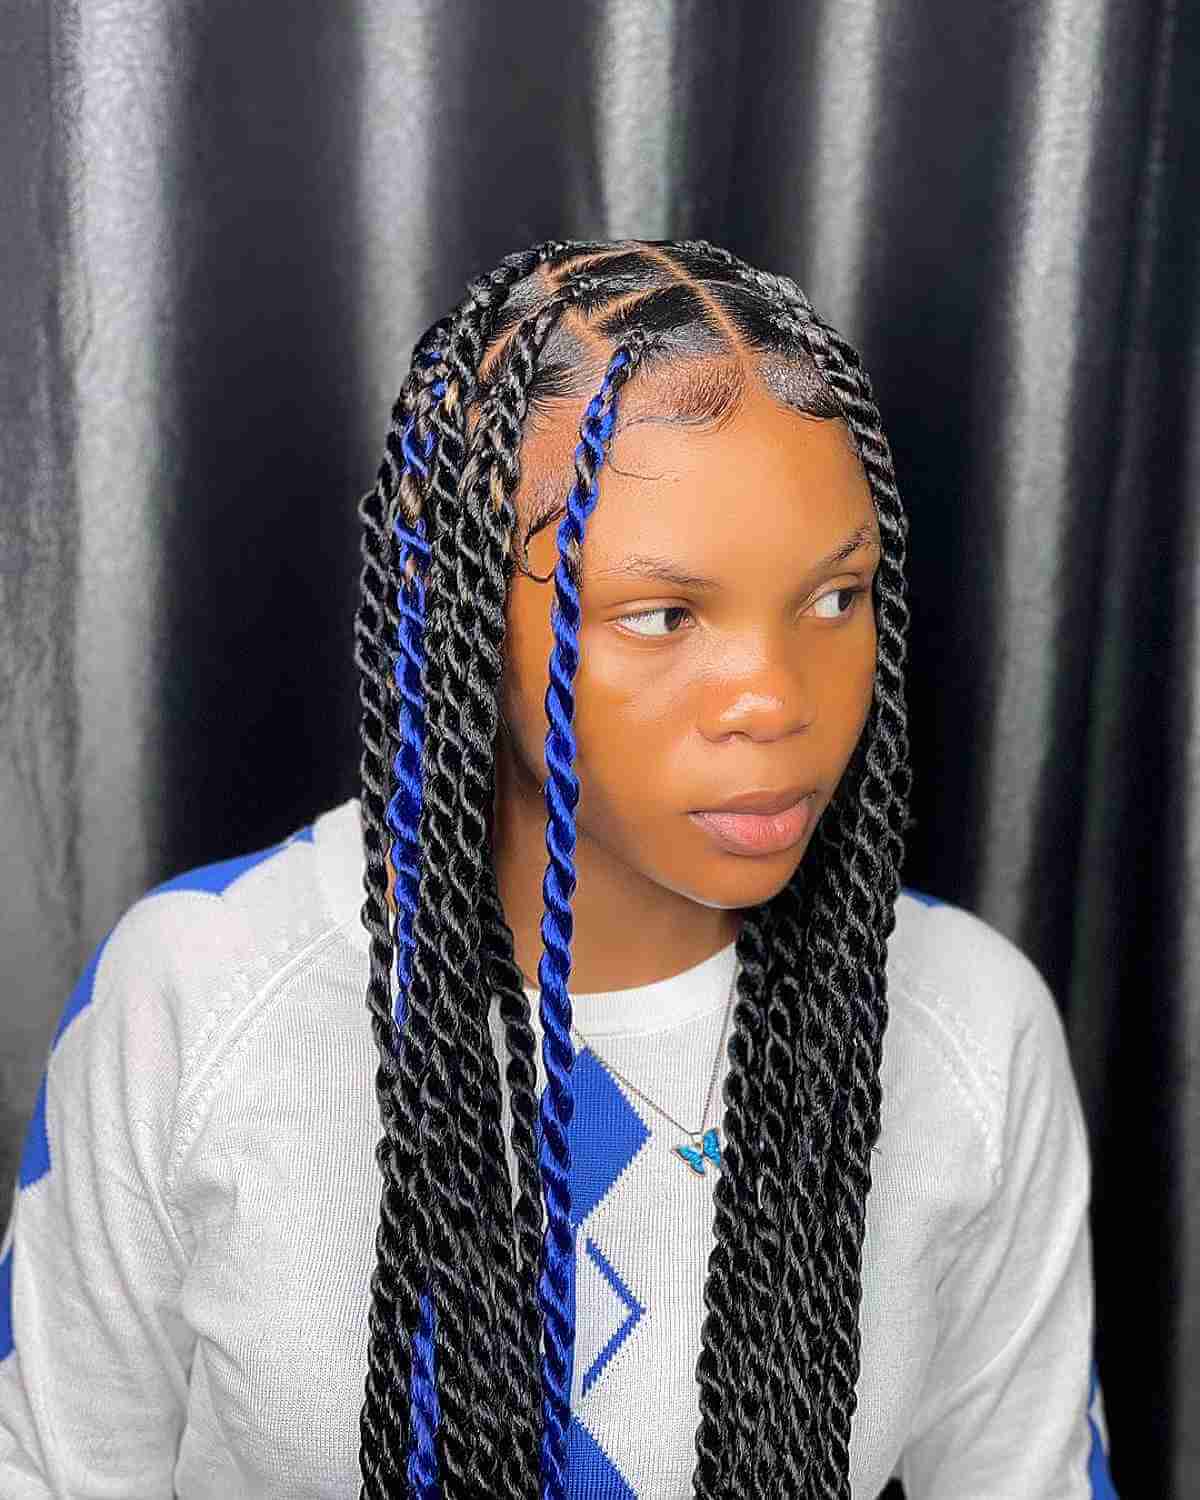 The 50 Hottest Twist Braid Styles Trending in 2023